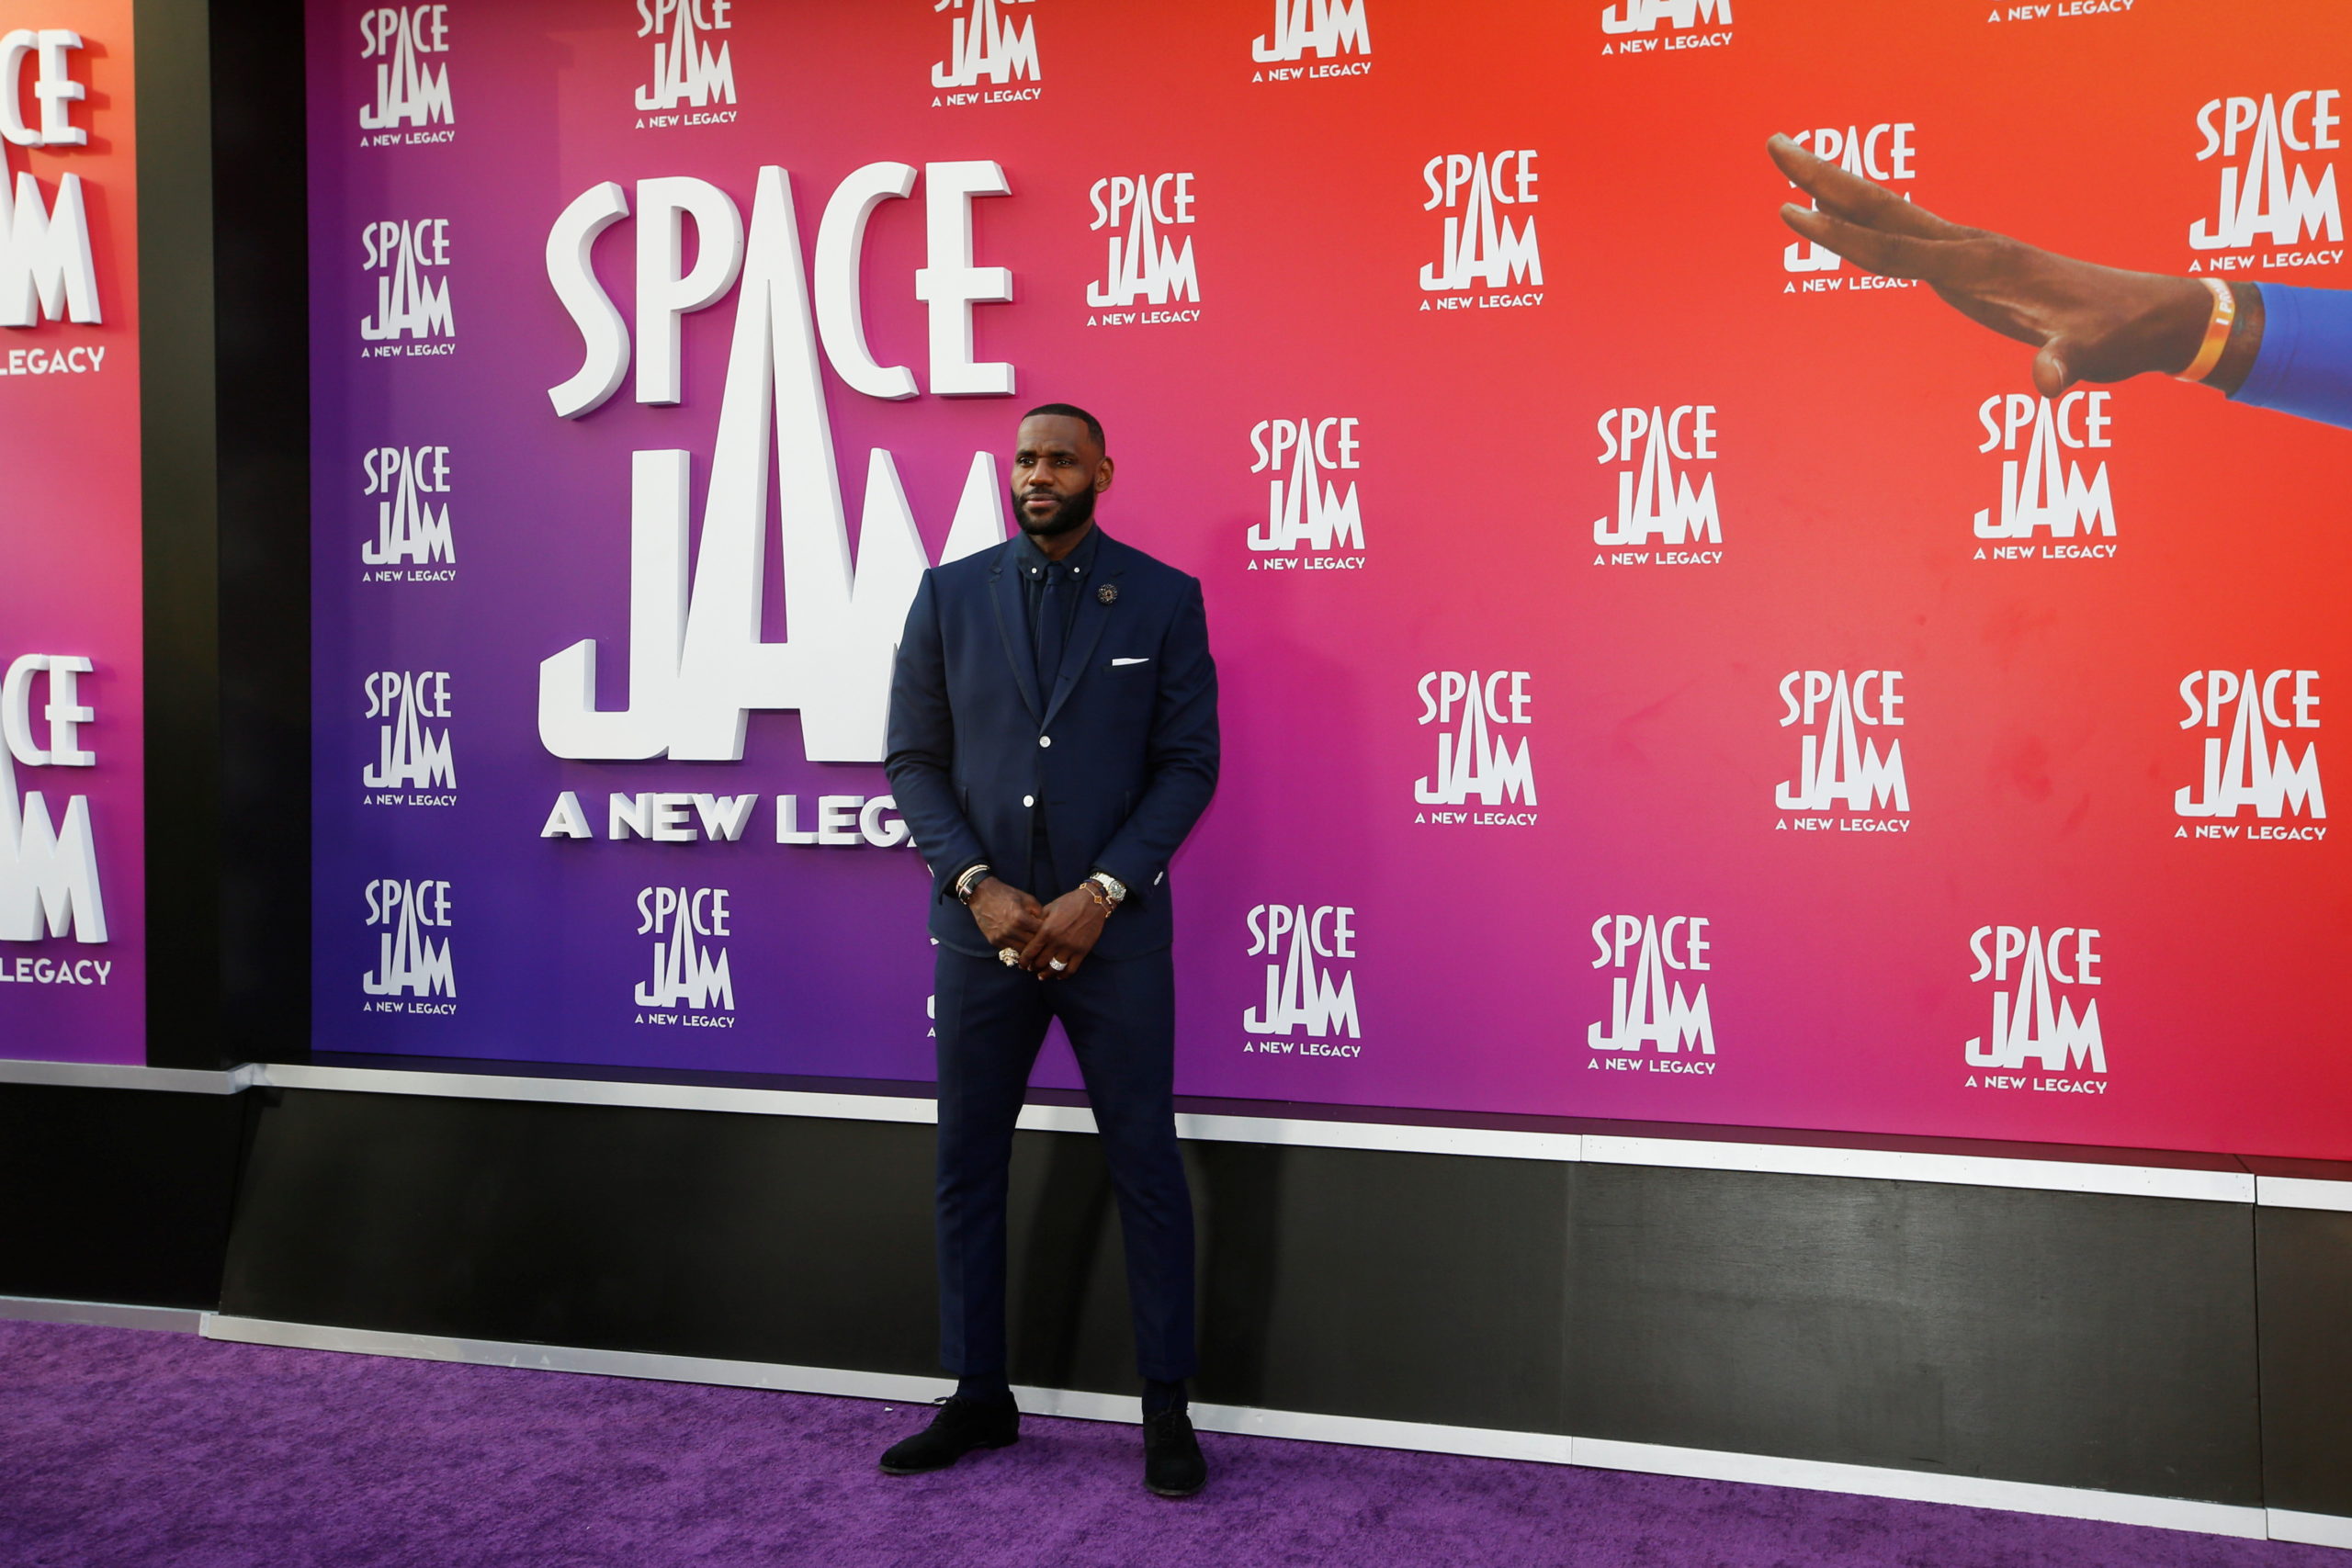 Cast member Lebron James attends the premiere for the film Space Jam: A New Legacy in Los Angeles, California, U.S. July 12, 2021.